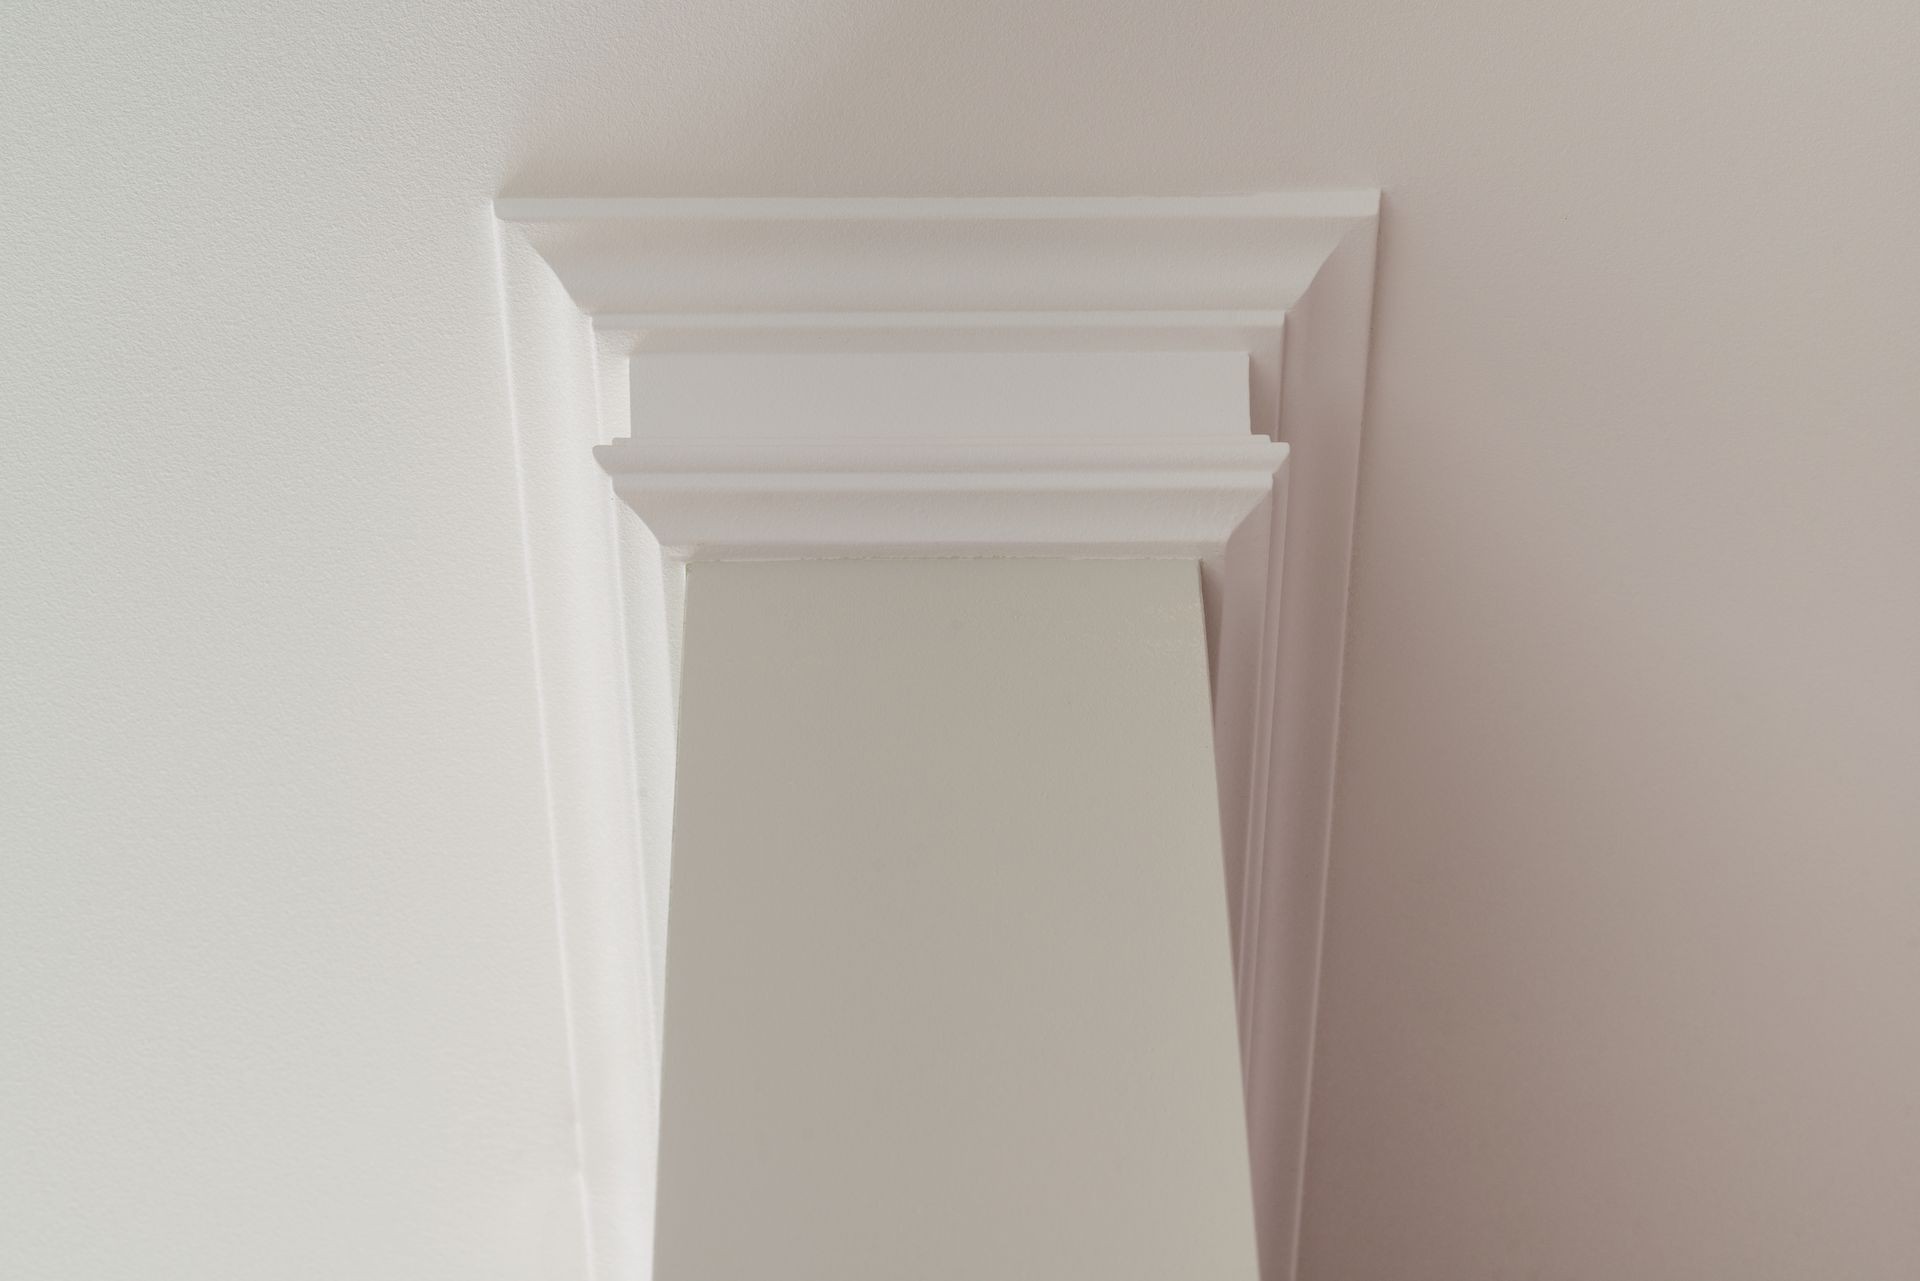 Ceiling moldings in the interior, detail of intricate corner